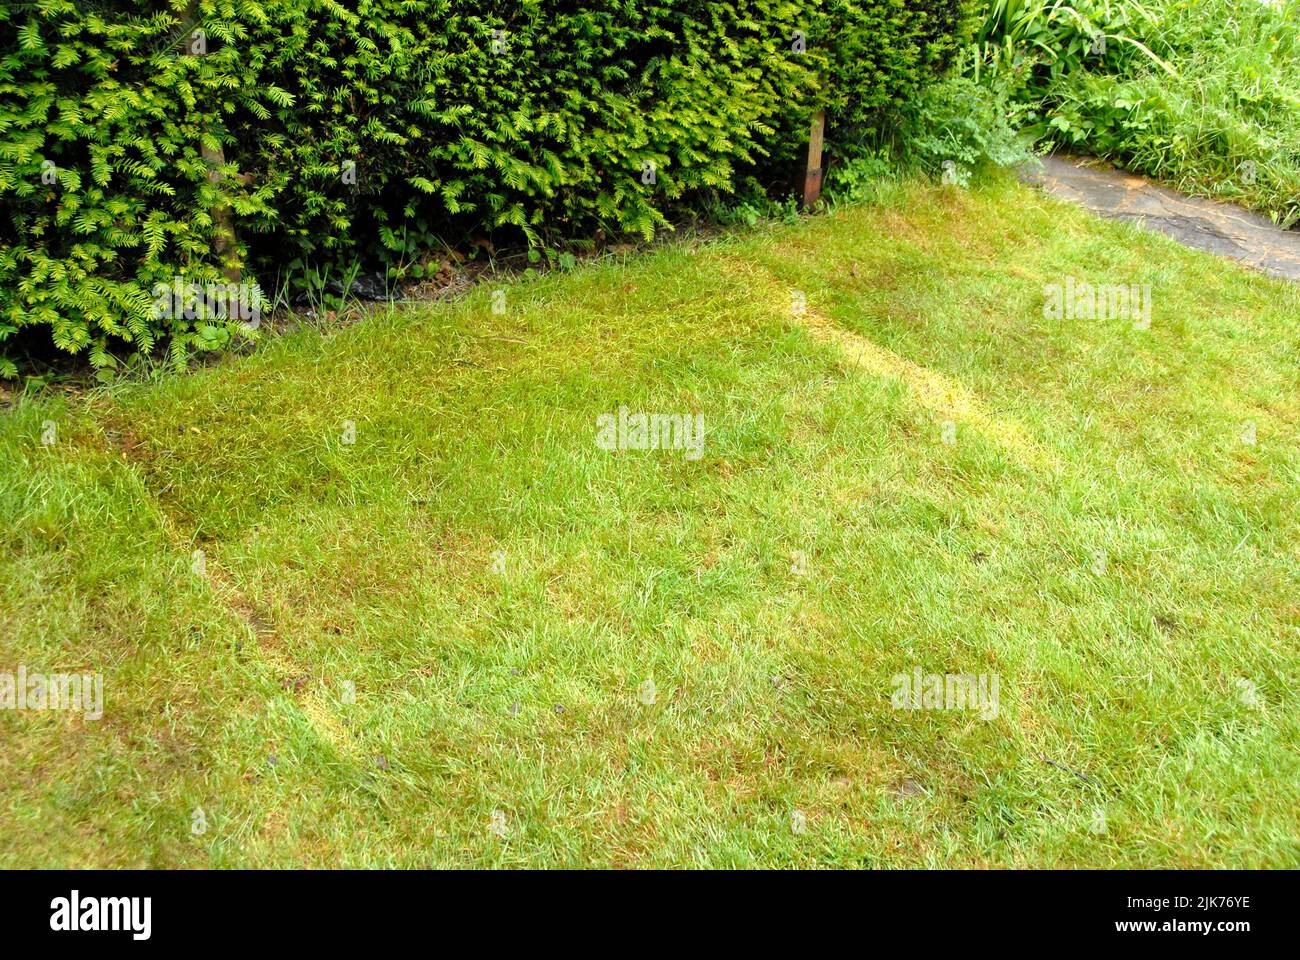 Yellow marks left on domestic lawn where building supplies had been stored temporarily Stock Photo